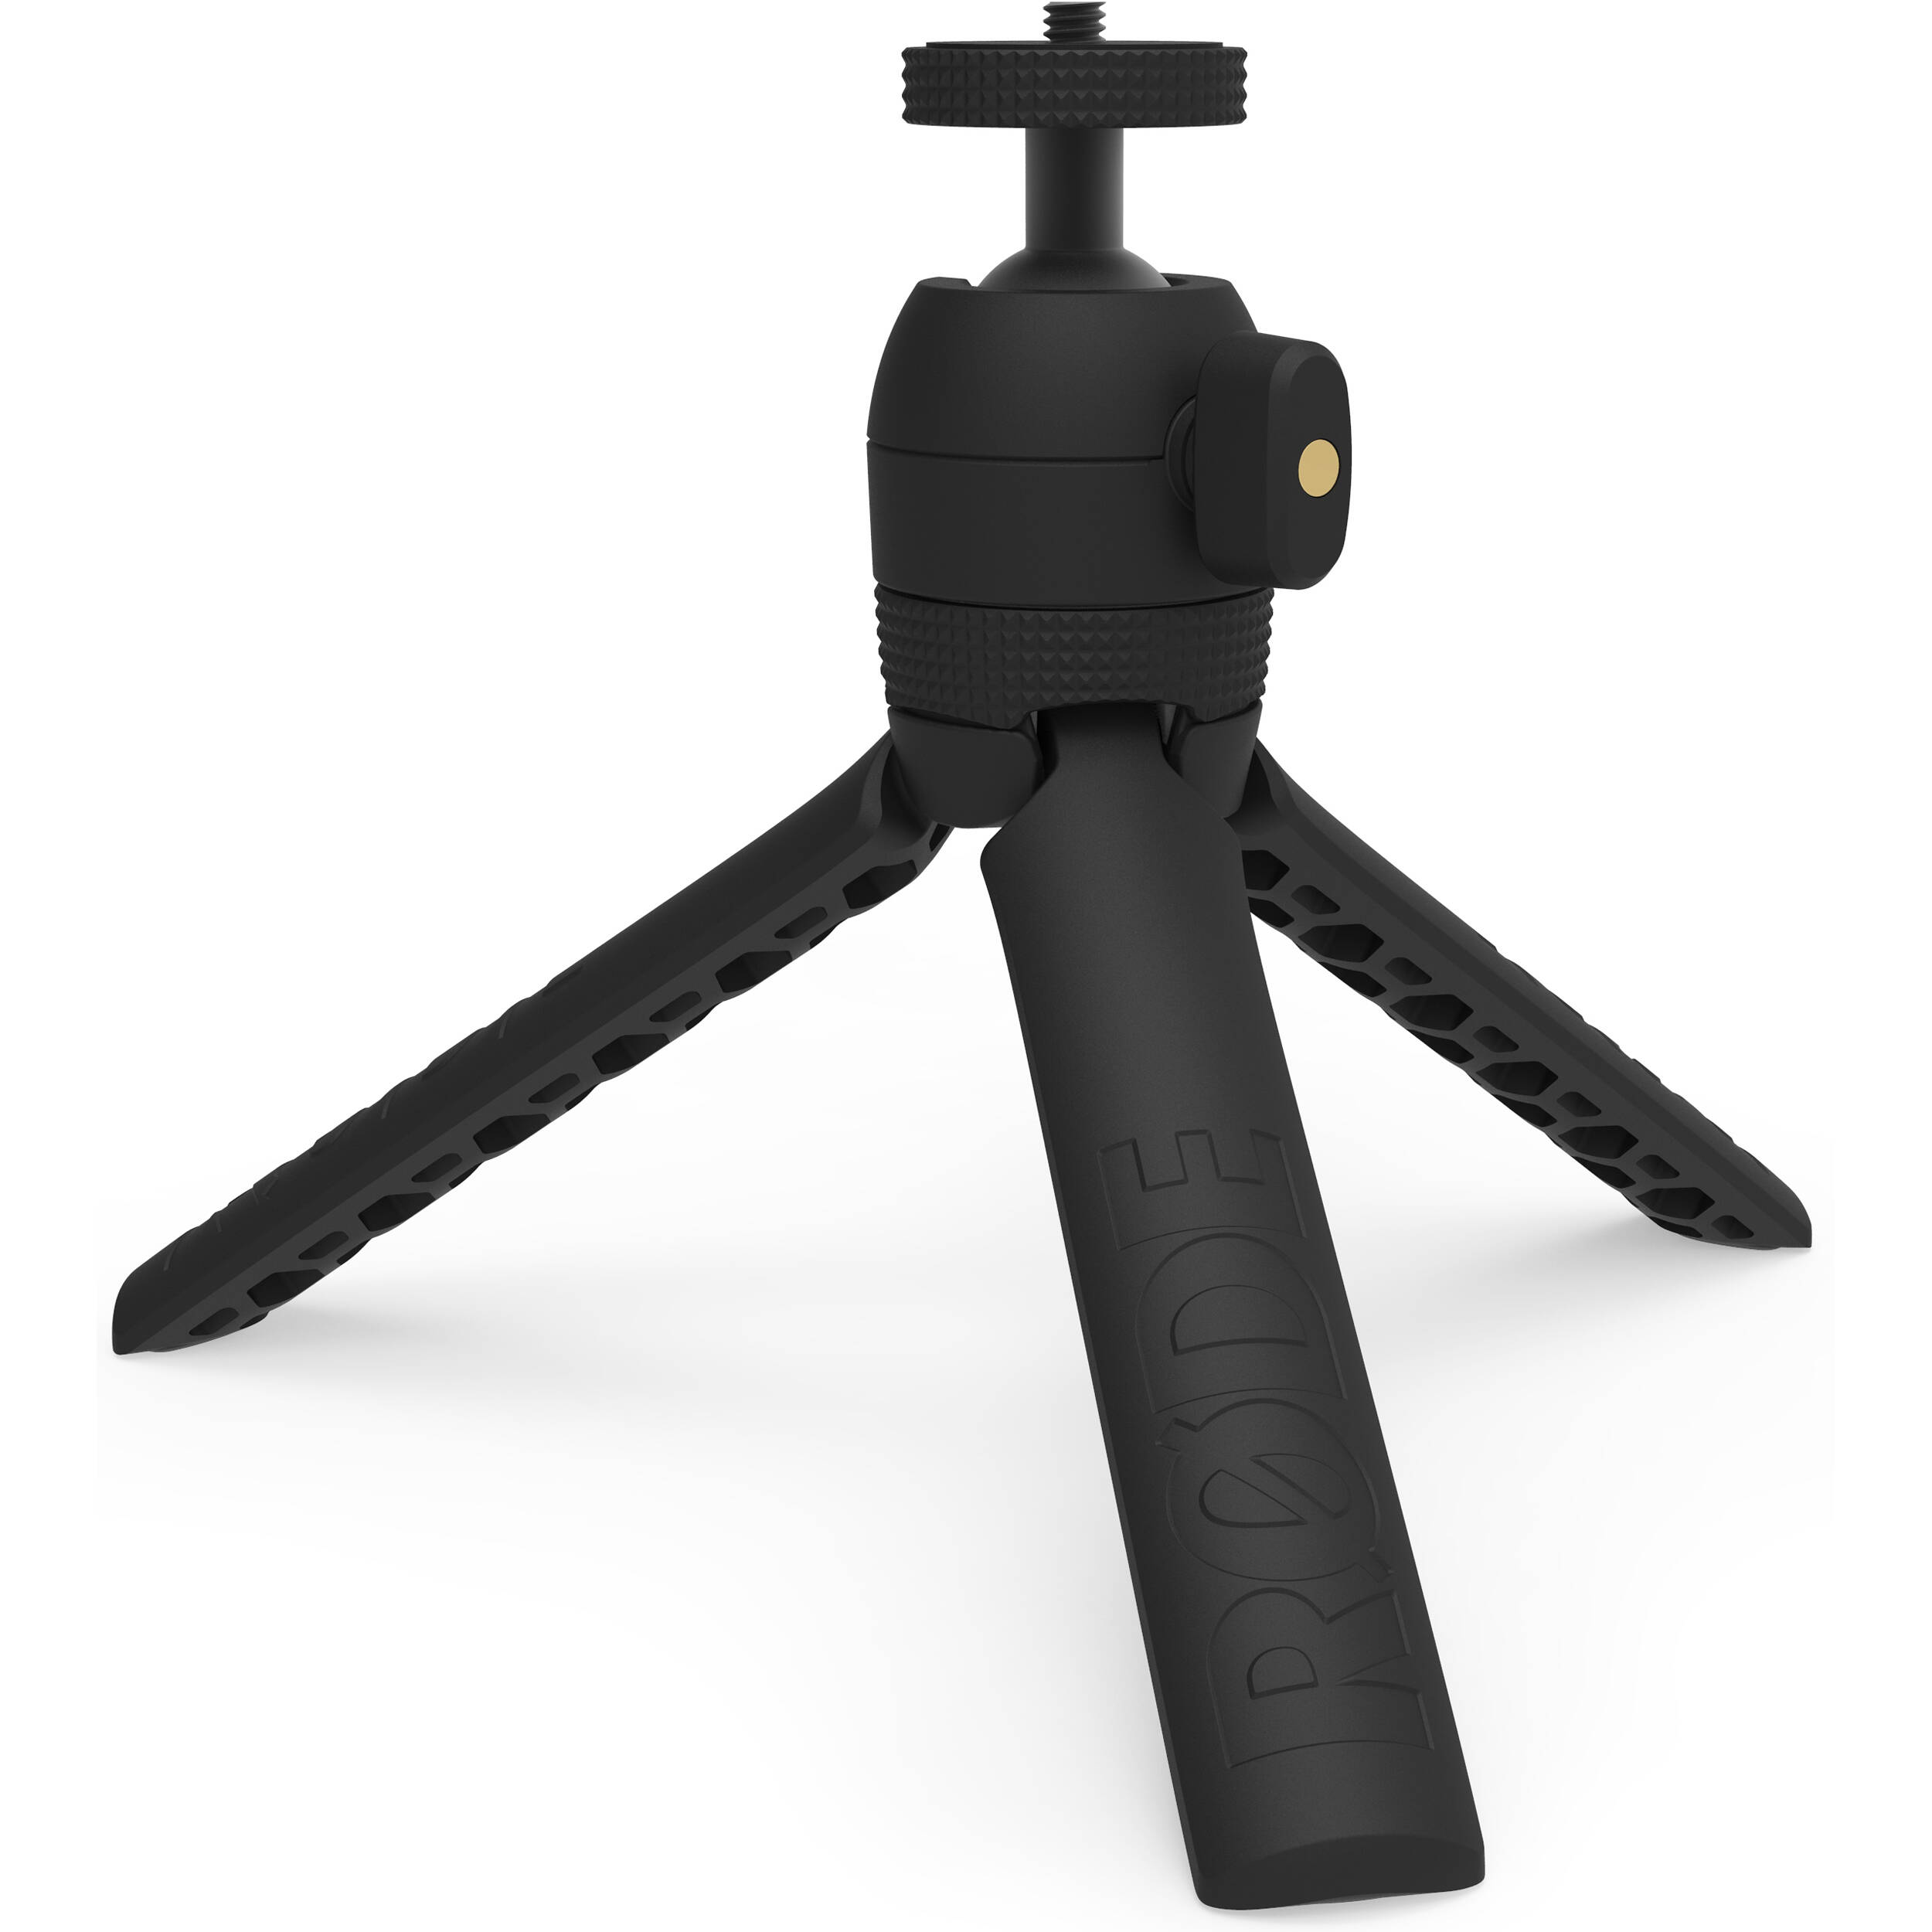 Kit Vlogger Rode, comprend Videomicro, Tripod 2, Smart Grip, Microled Light and Accessories - Universal